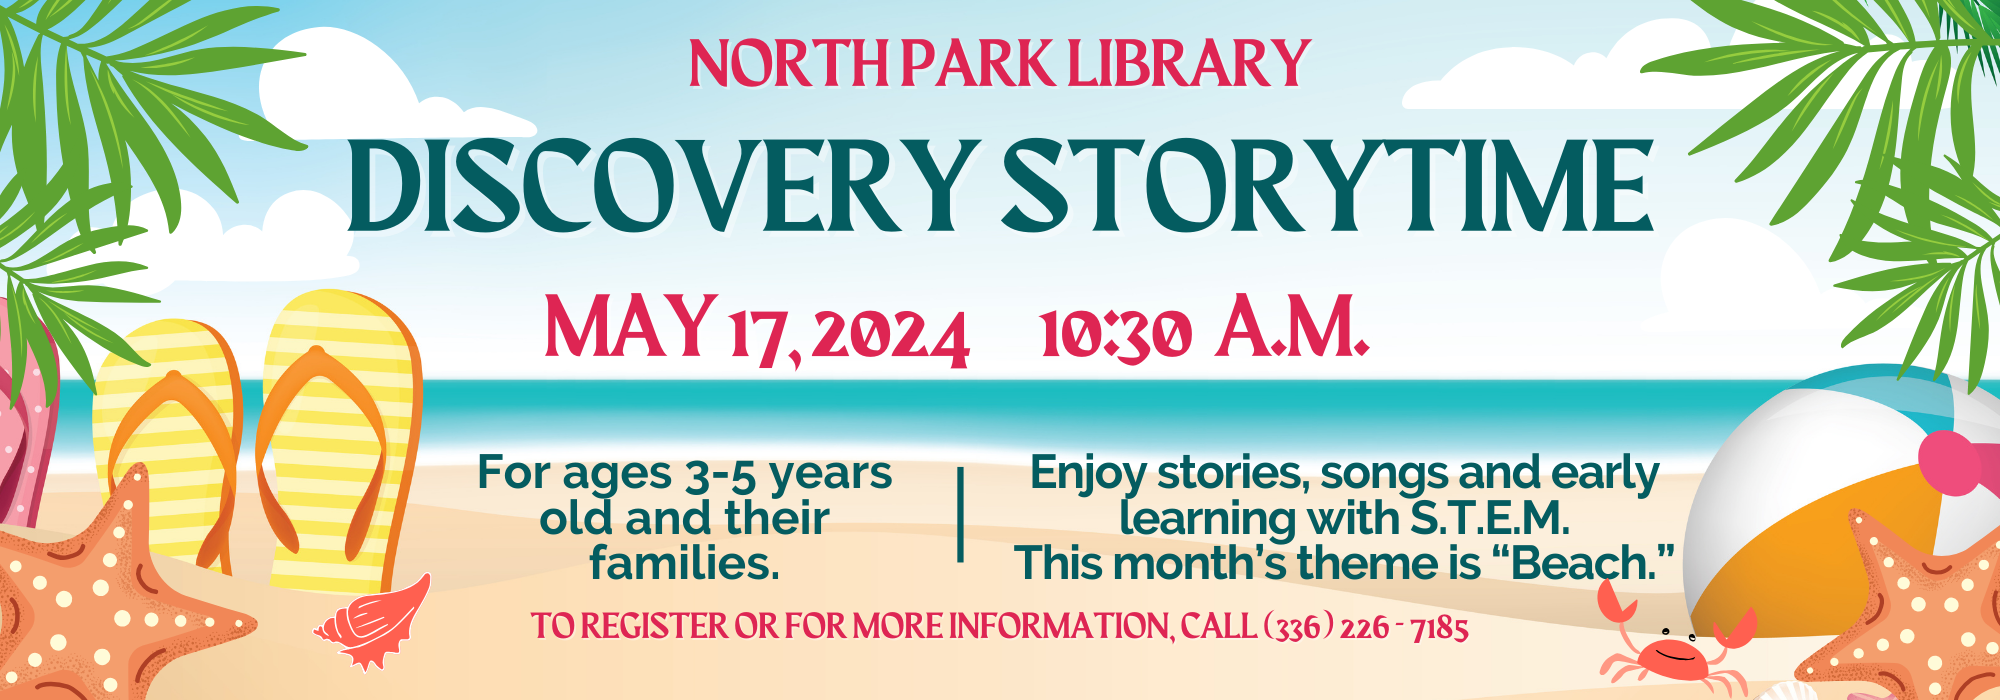 5.17 at 1030 am - Discovery Storytime at North Park